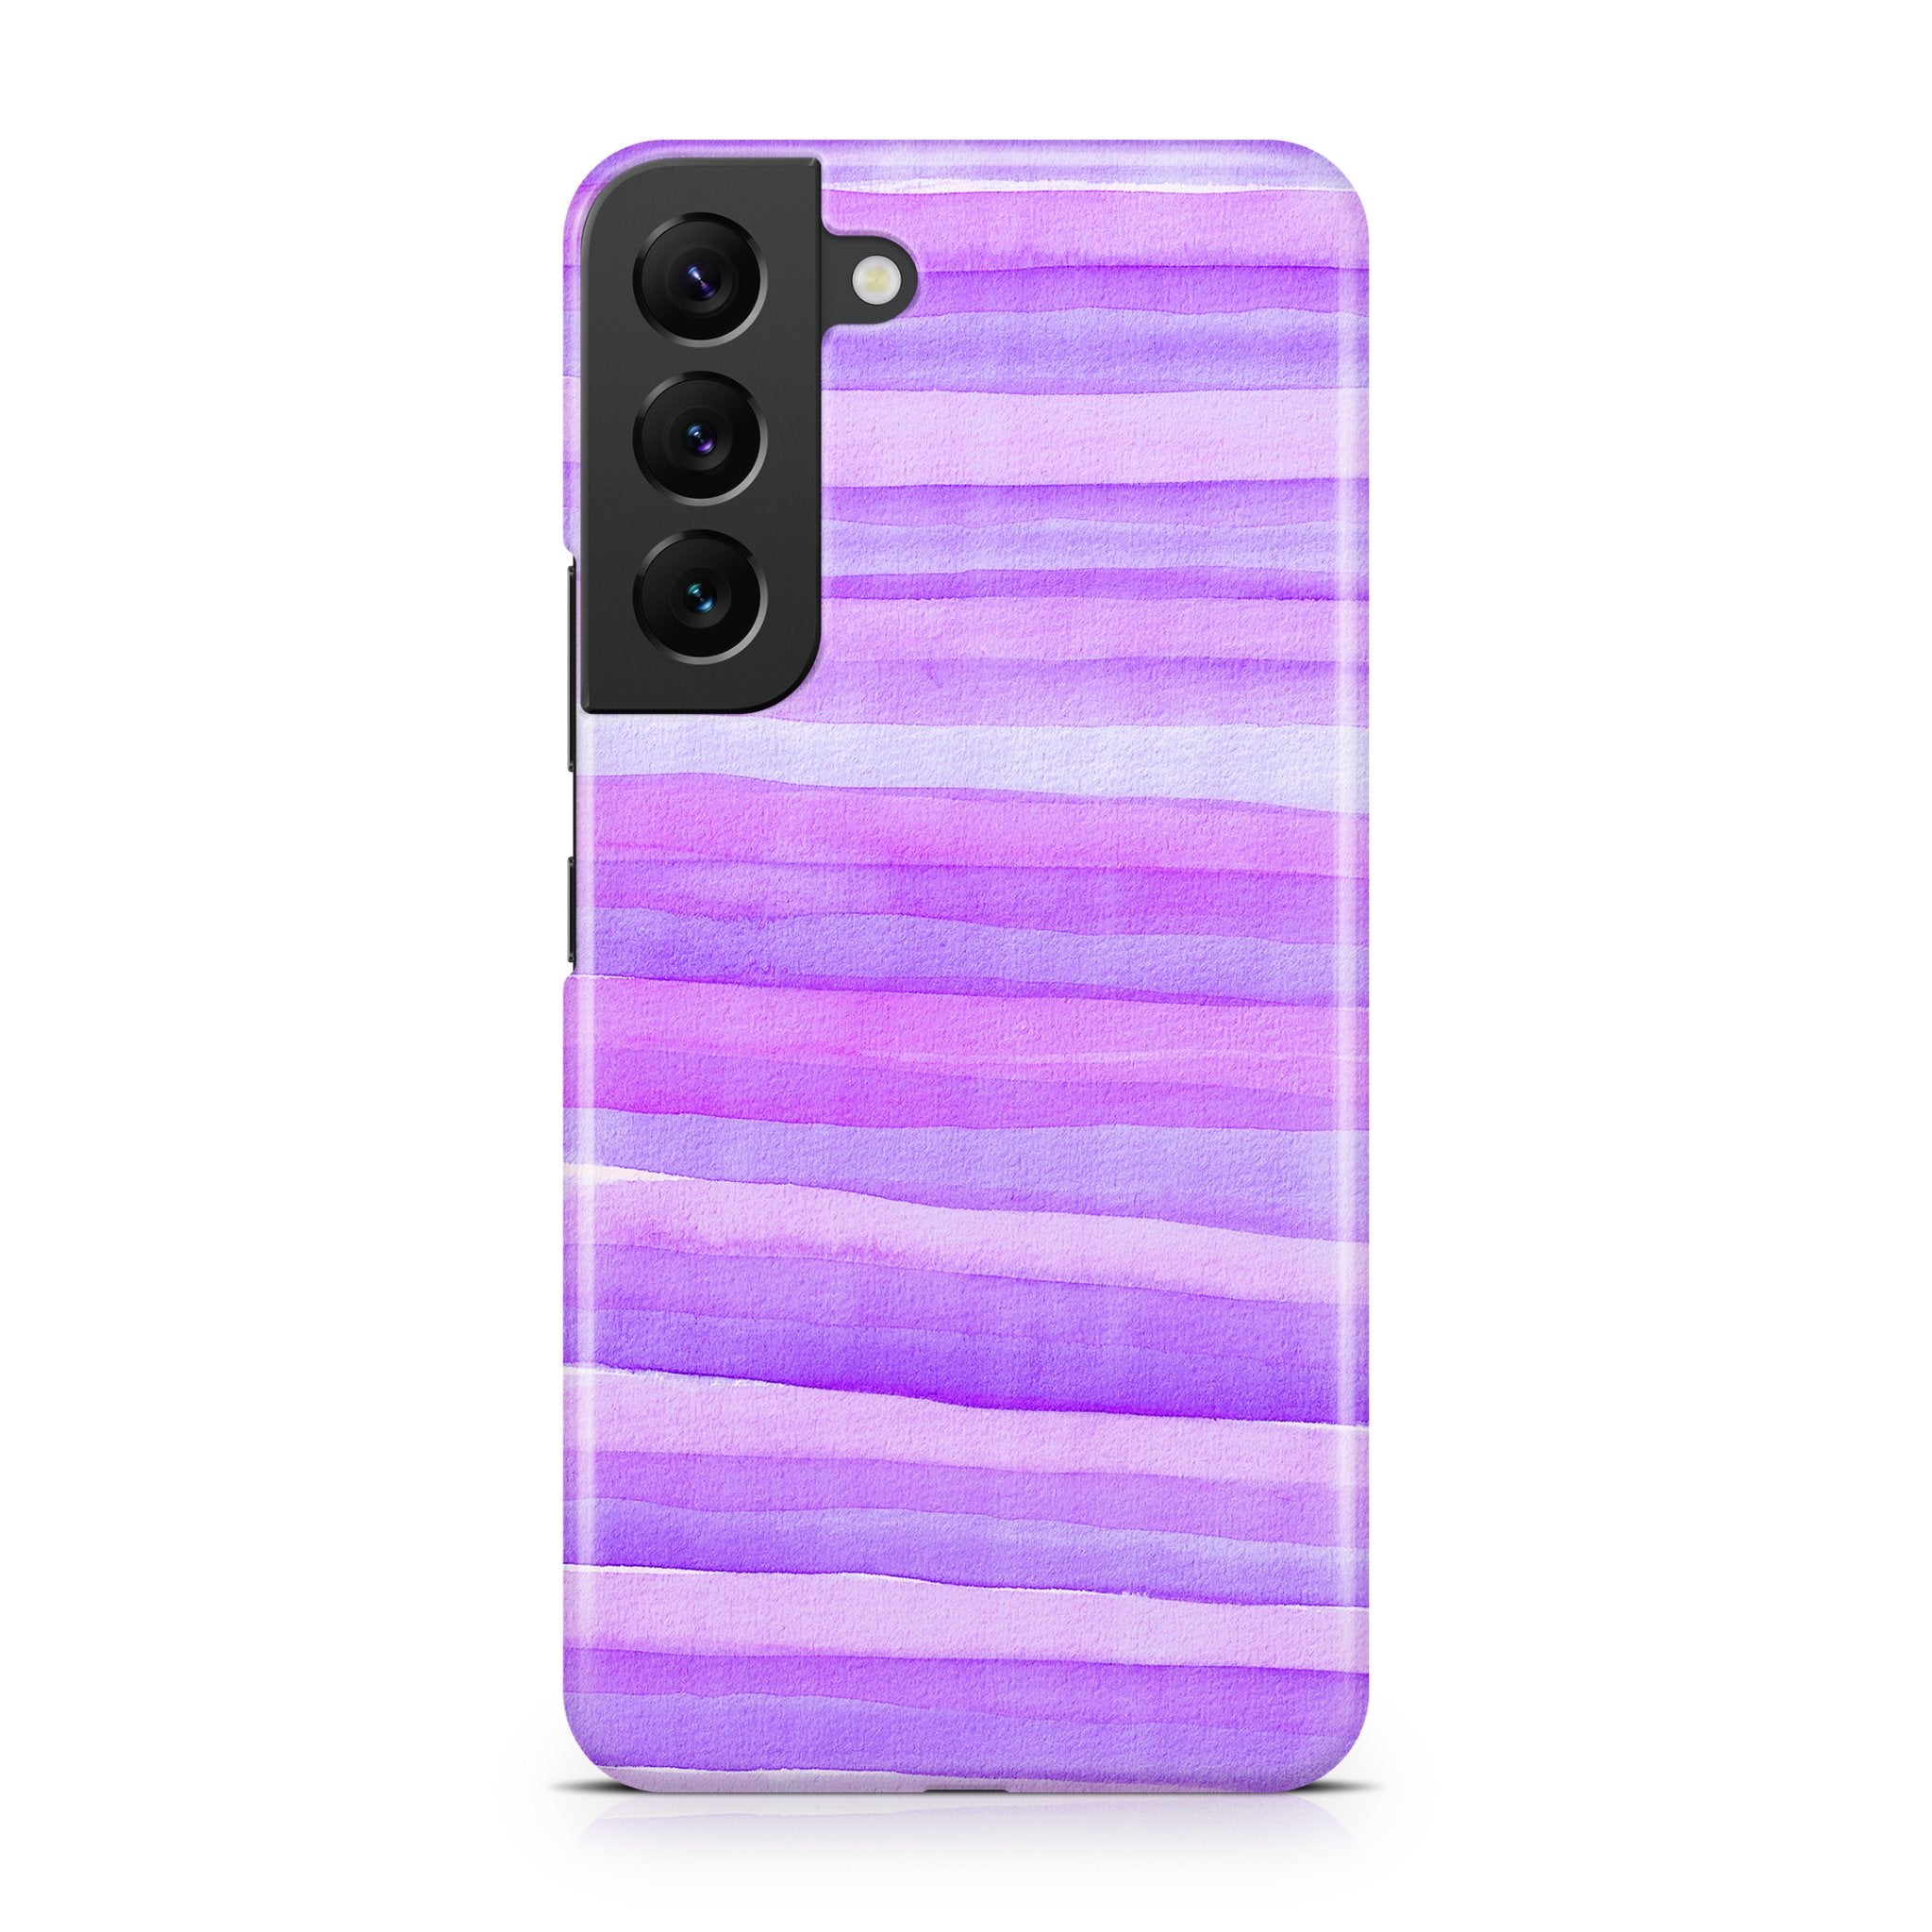 Purple Passion - Samsung phone case designs by CaseSwagger